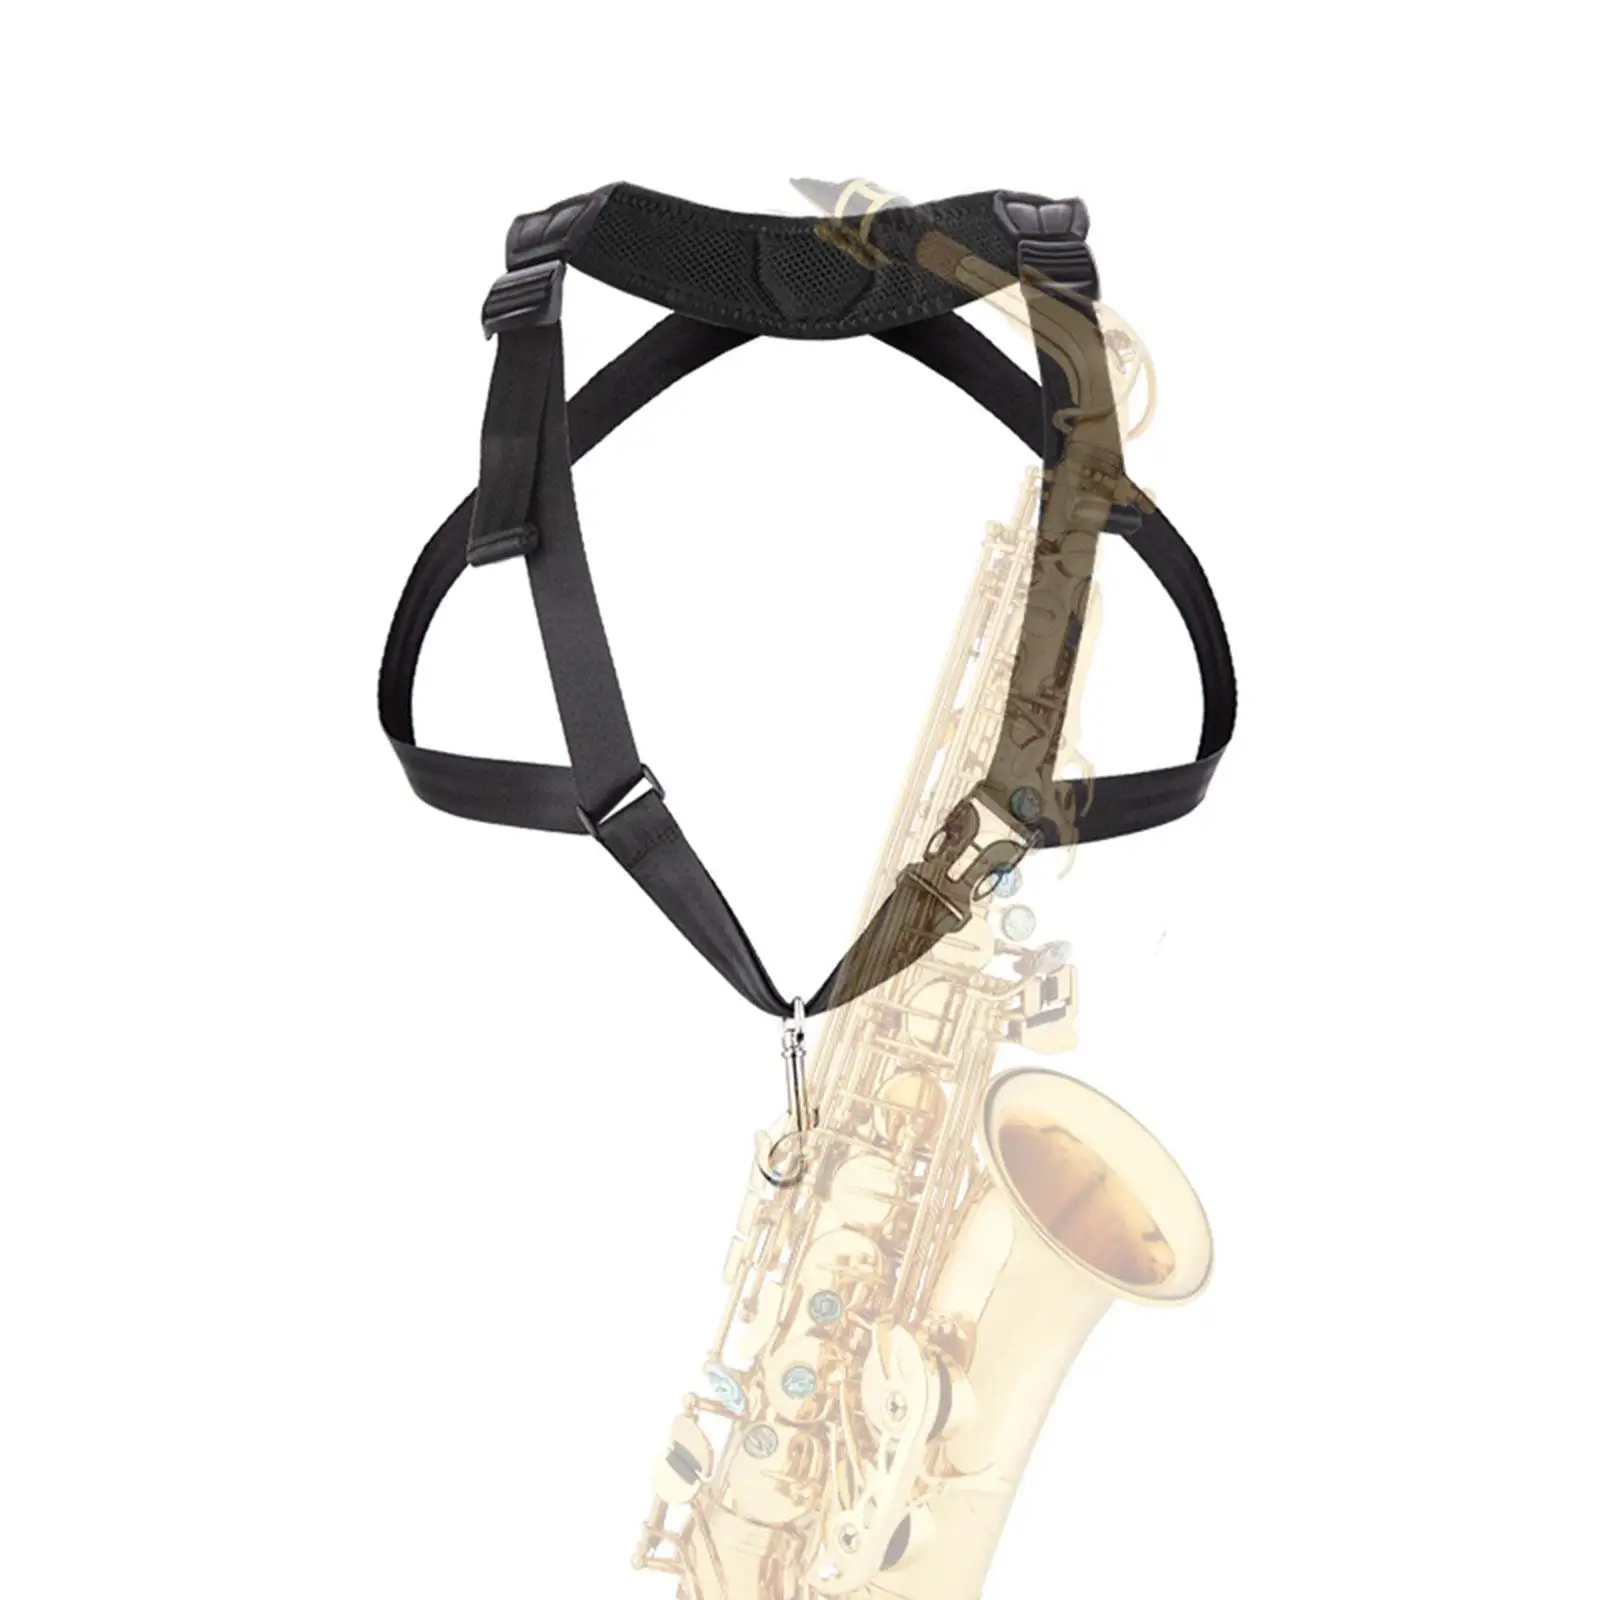 Professional  Neck Strap Metal Hook Breathable  Shoulder Harness Music Instrument Accessory for Tenor Soprano